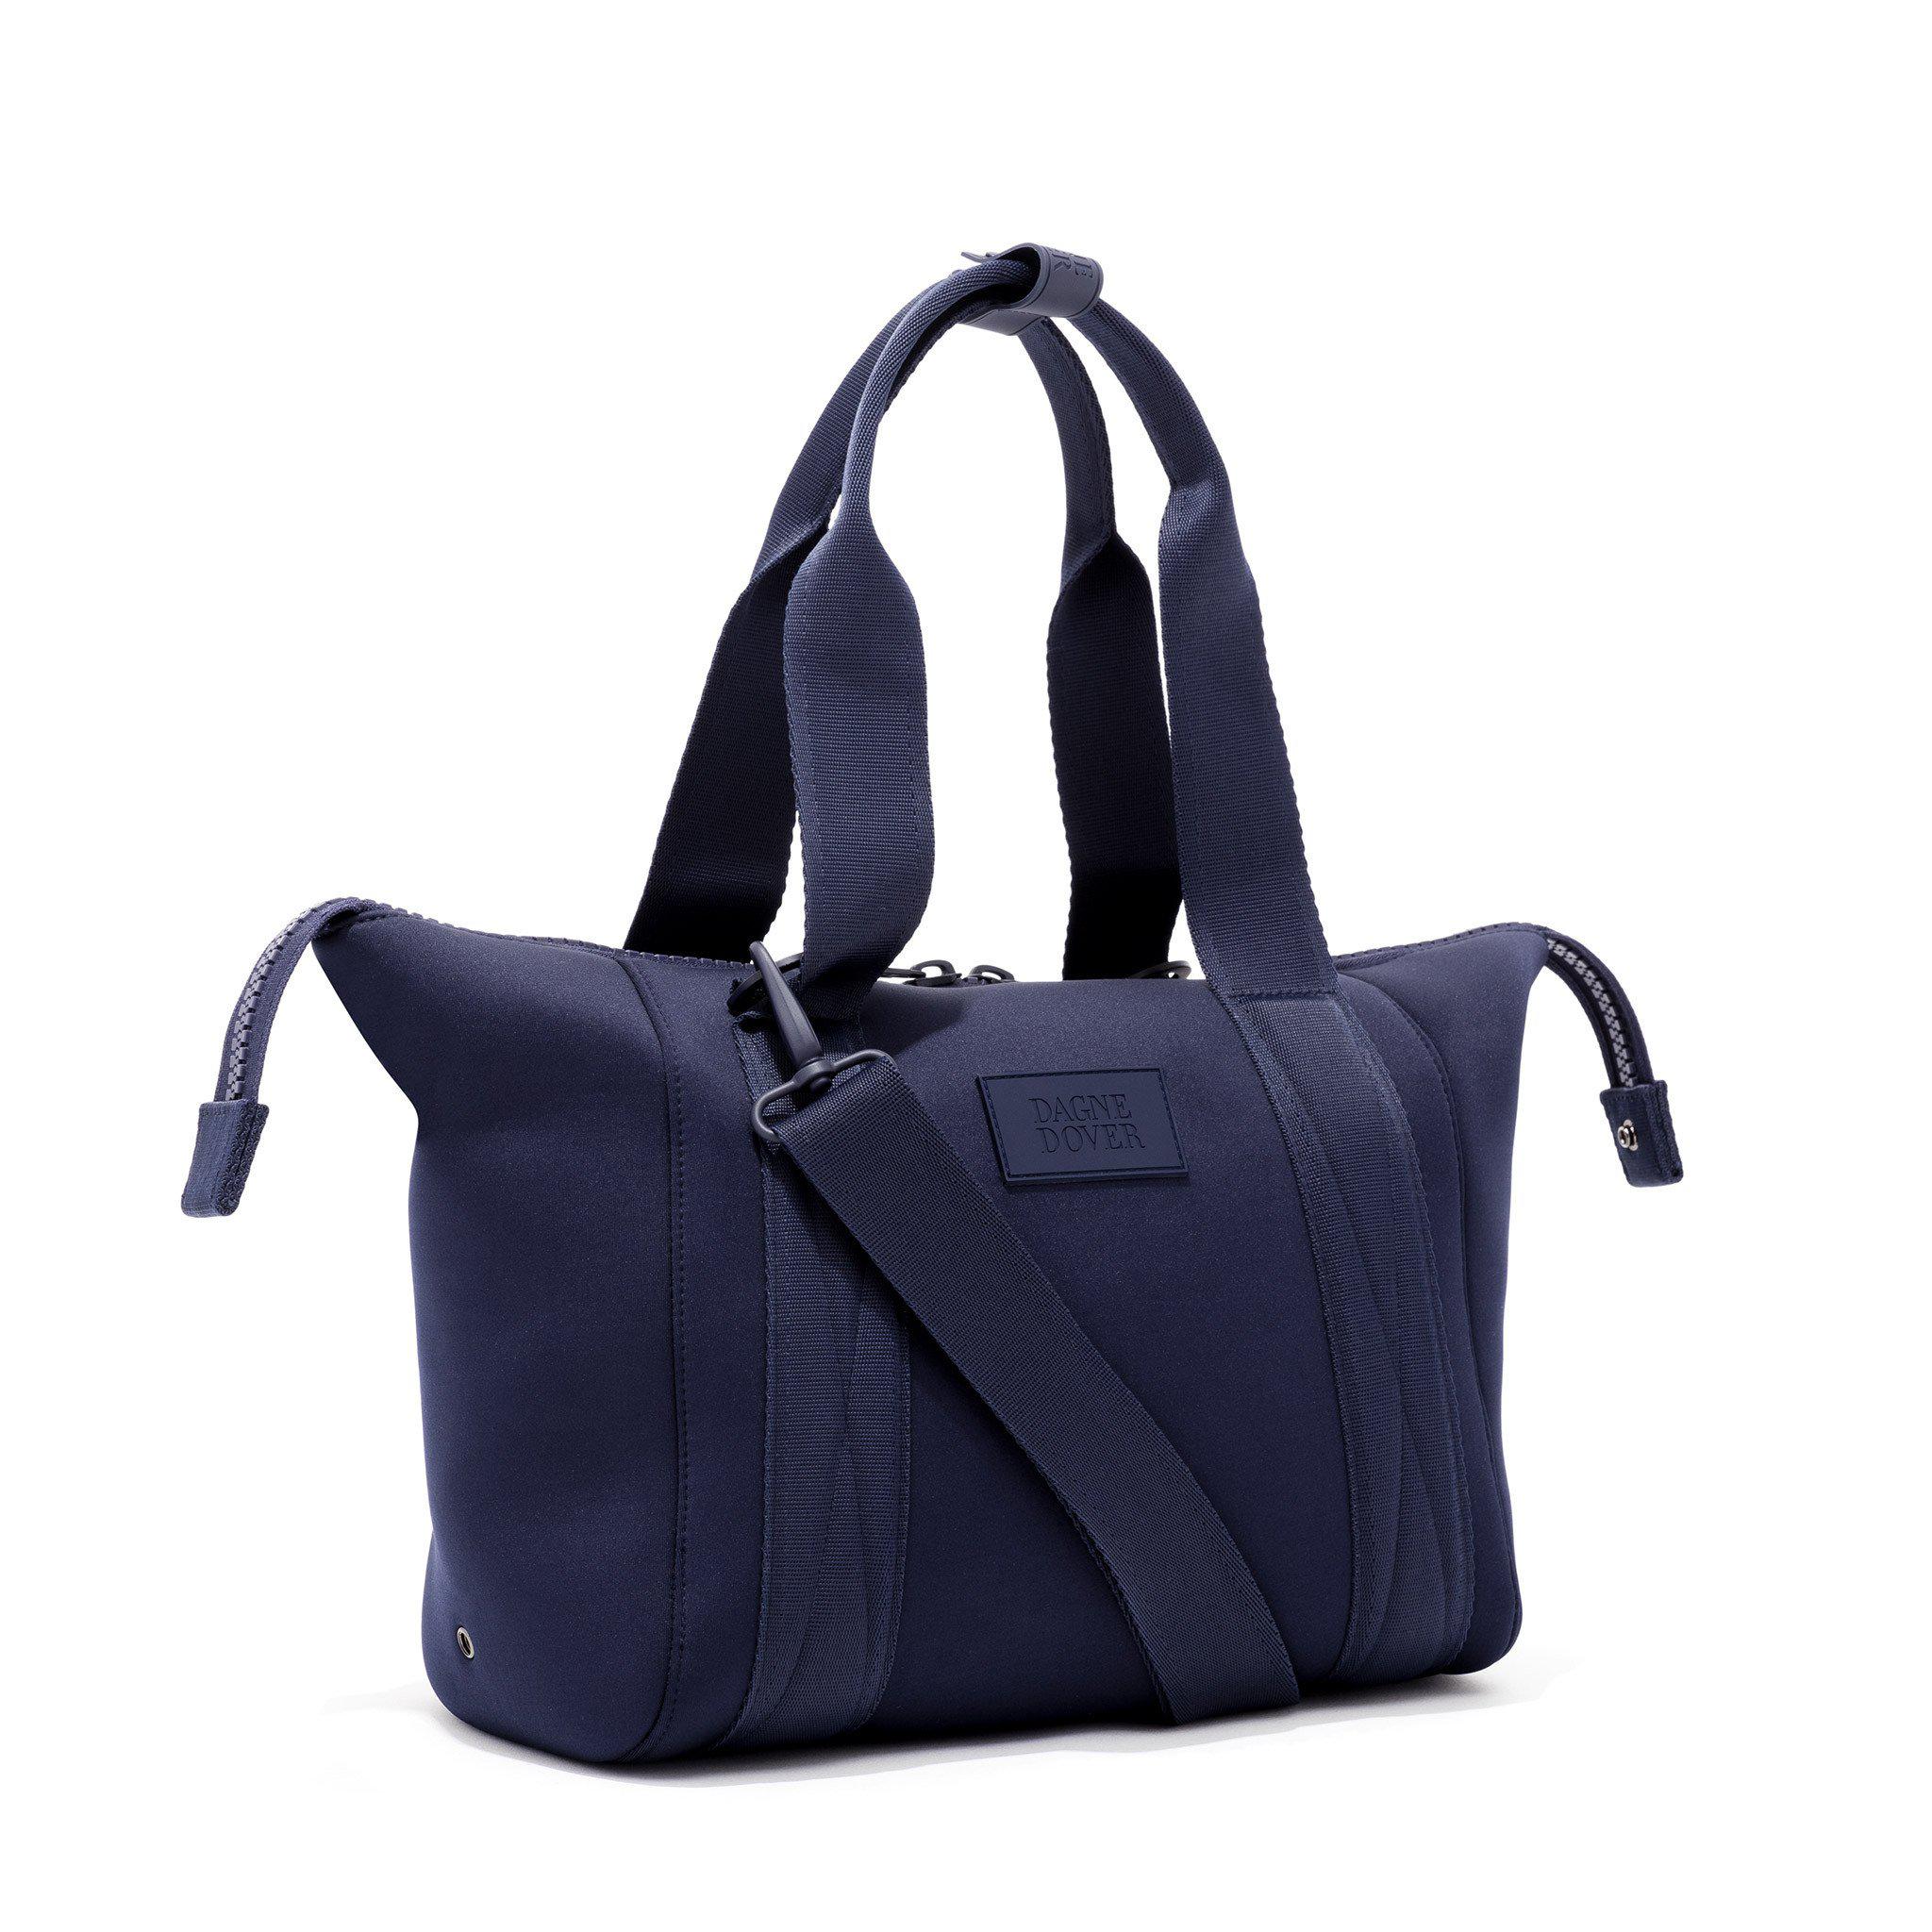 Dagne Dover Landon Carryall - Storm - Small in Blue - Save 19% - Lyst